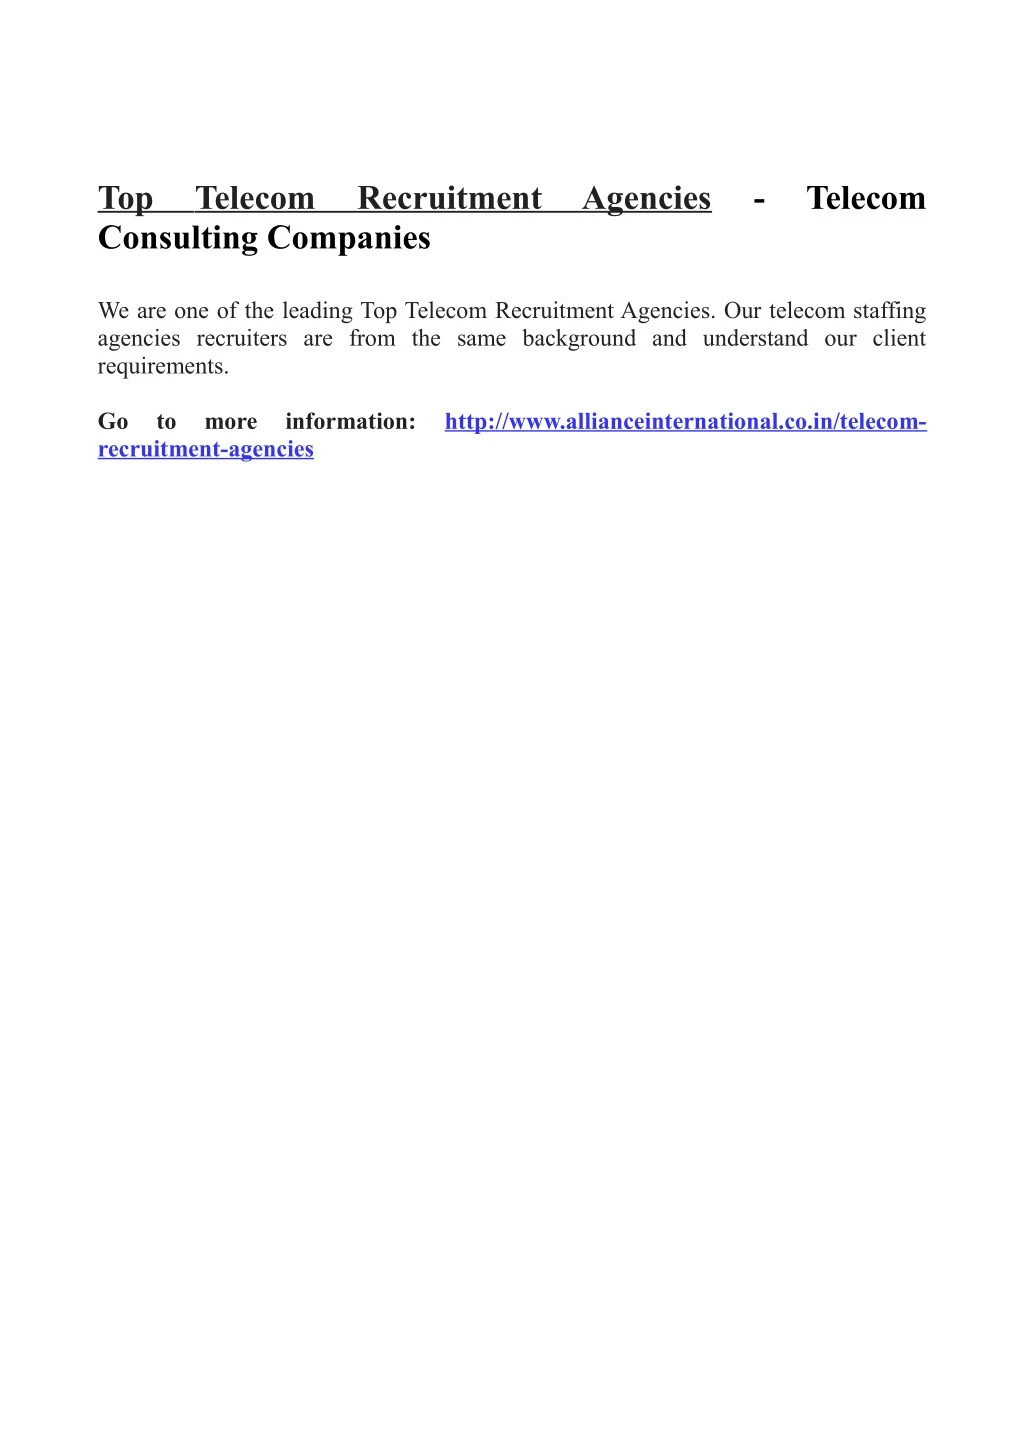 top consulting companies